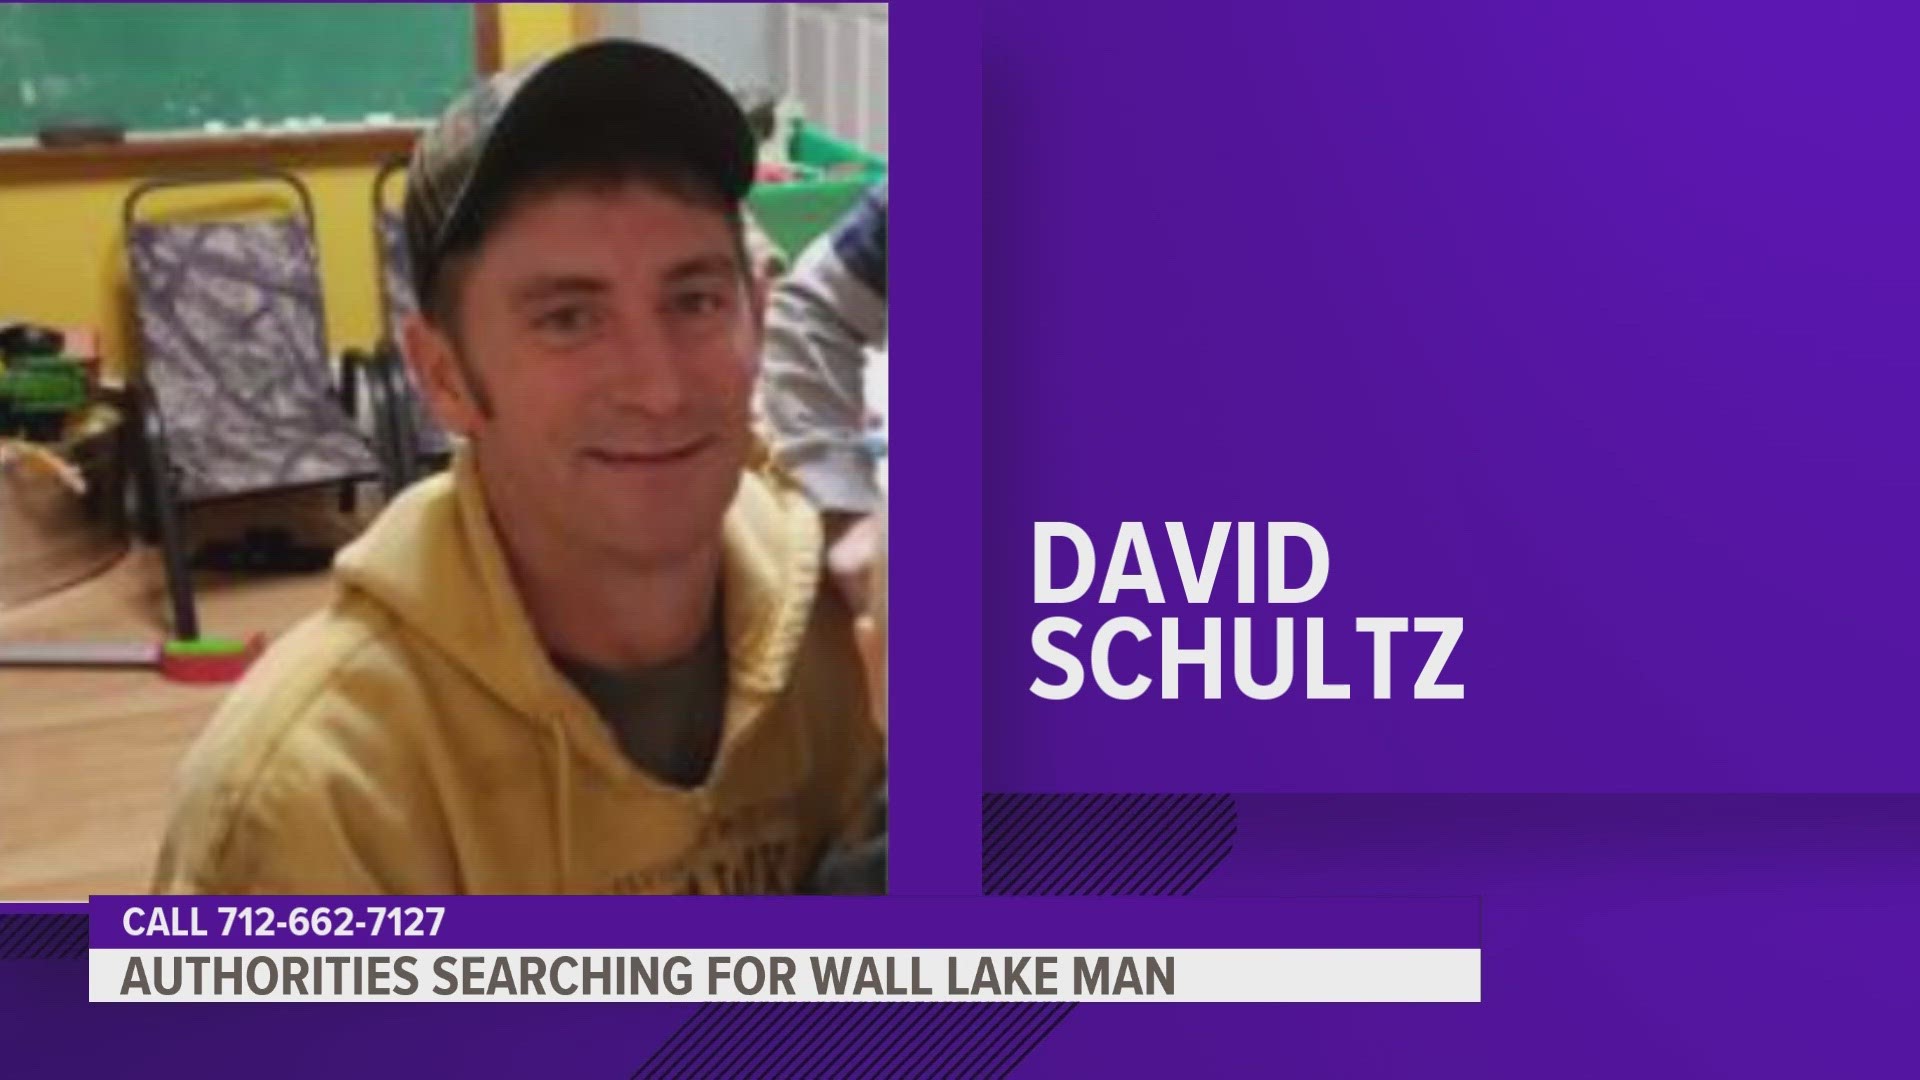 Iowa DCI is assisting in the investigation. Anyone who may know of Shultz's whereabouts is asked to call the Sac County Sheriff's Office at 712-662-7127.